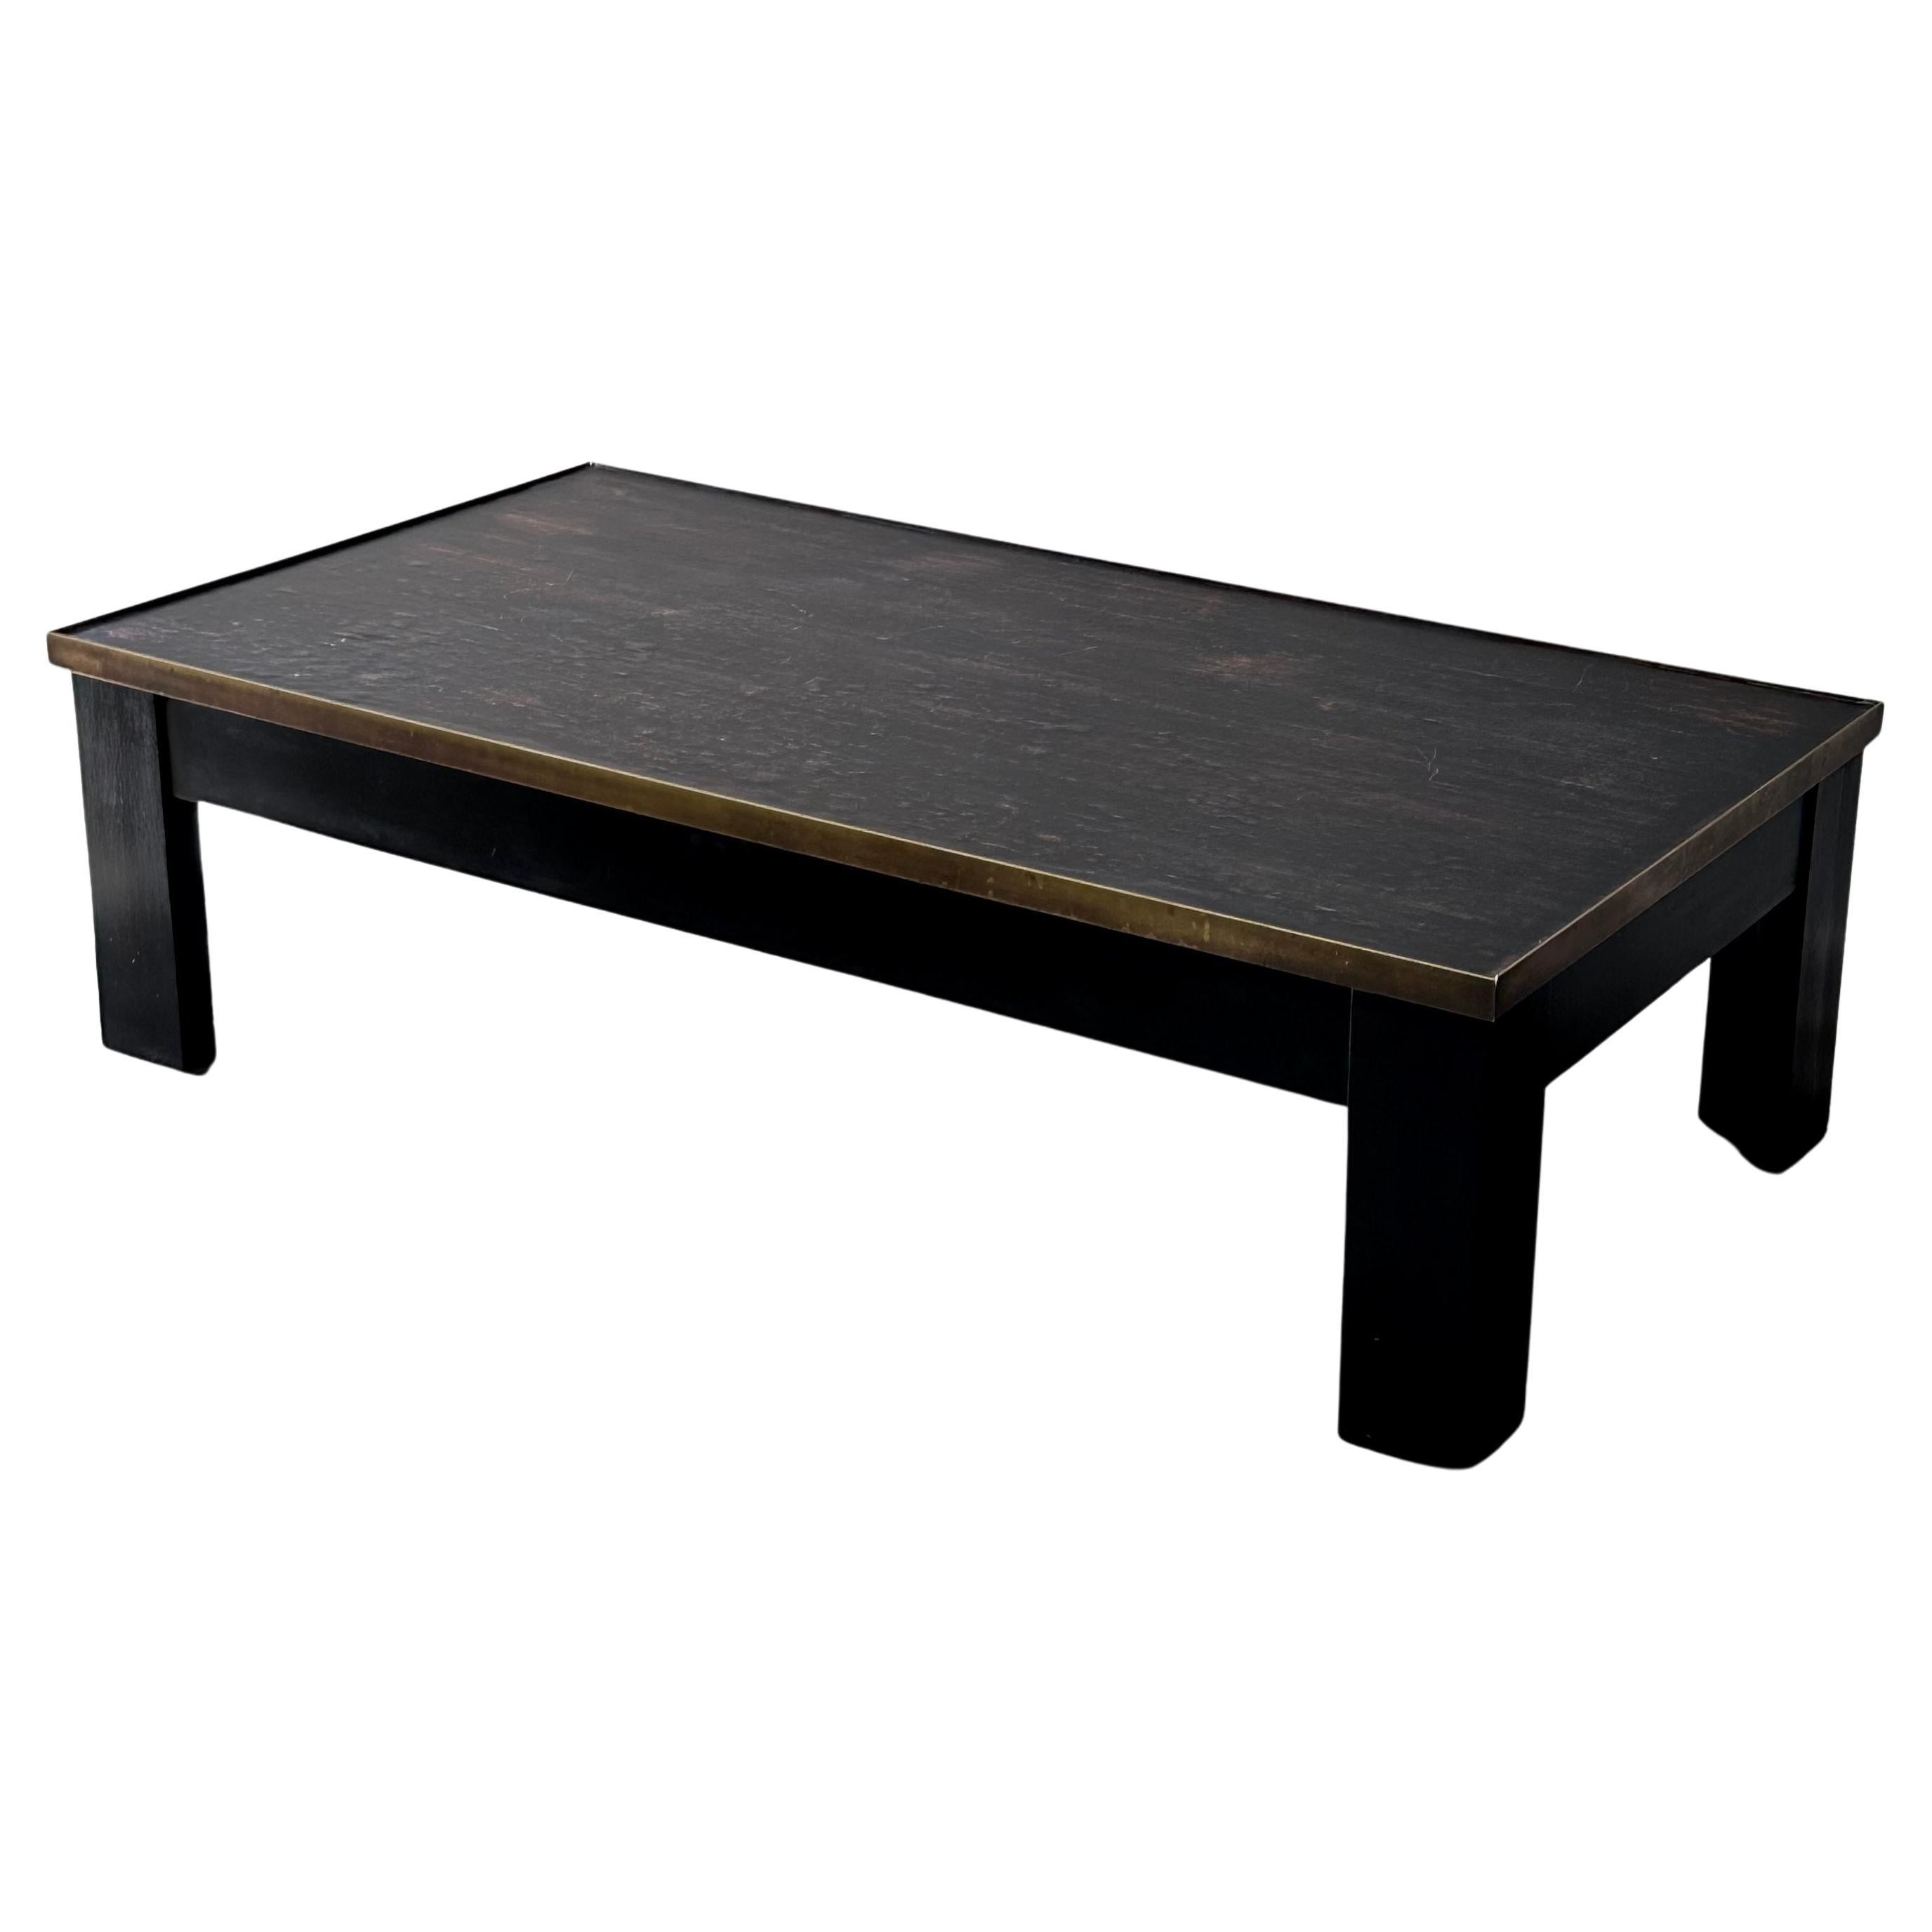 French Midcentury Rectangular Coffee Table with Leather Top